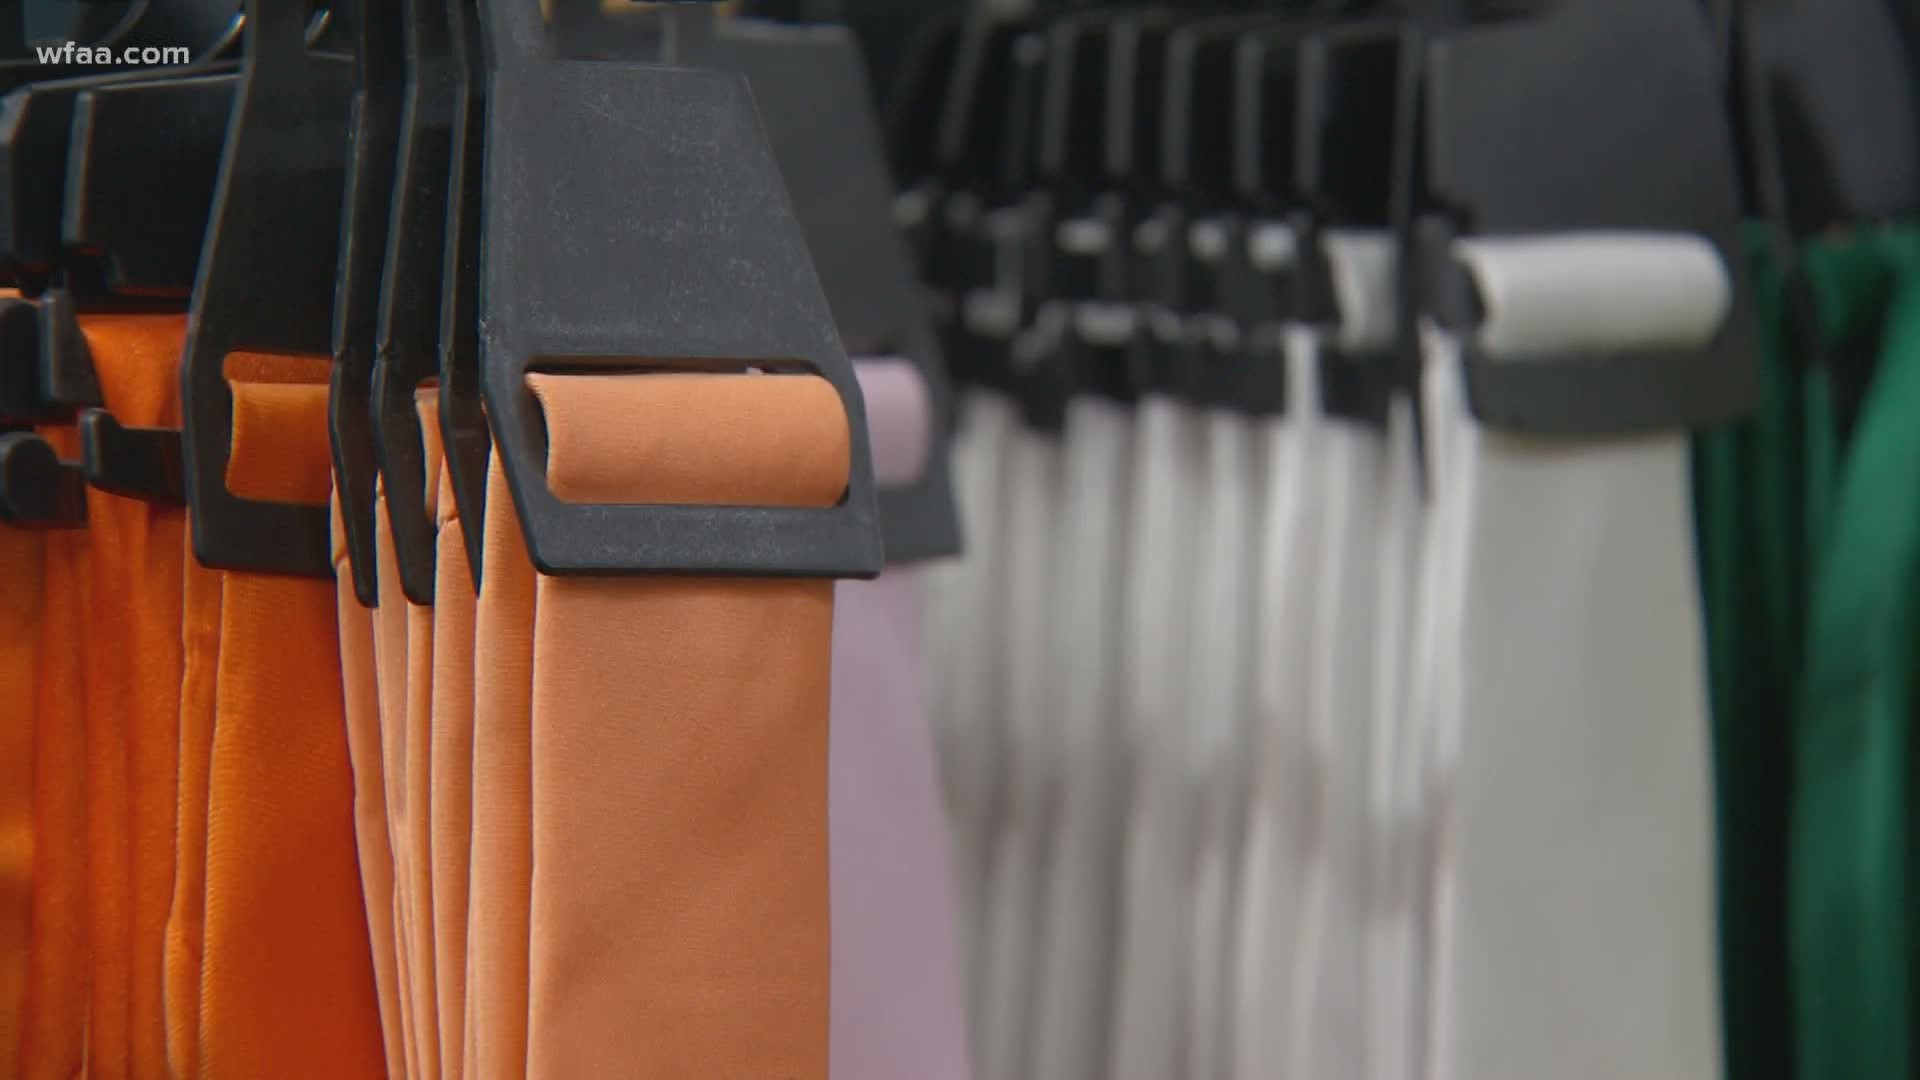 Clients say Roberts Ready To Wear has been a staple for quality and unique fashion items for six decades. But its owner says the pandemic has added some challenges.